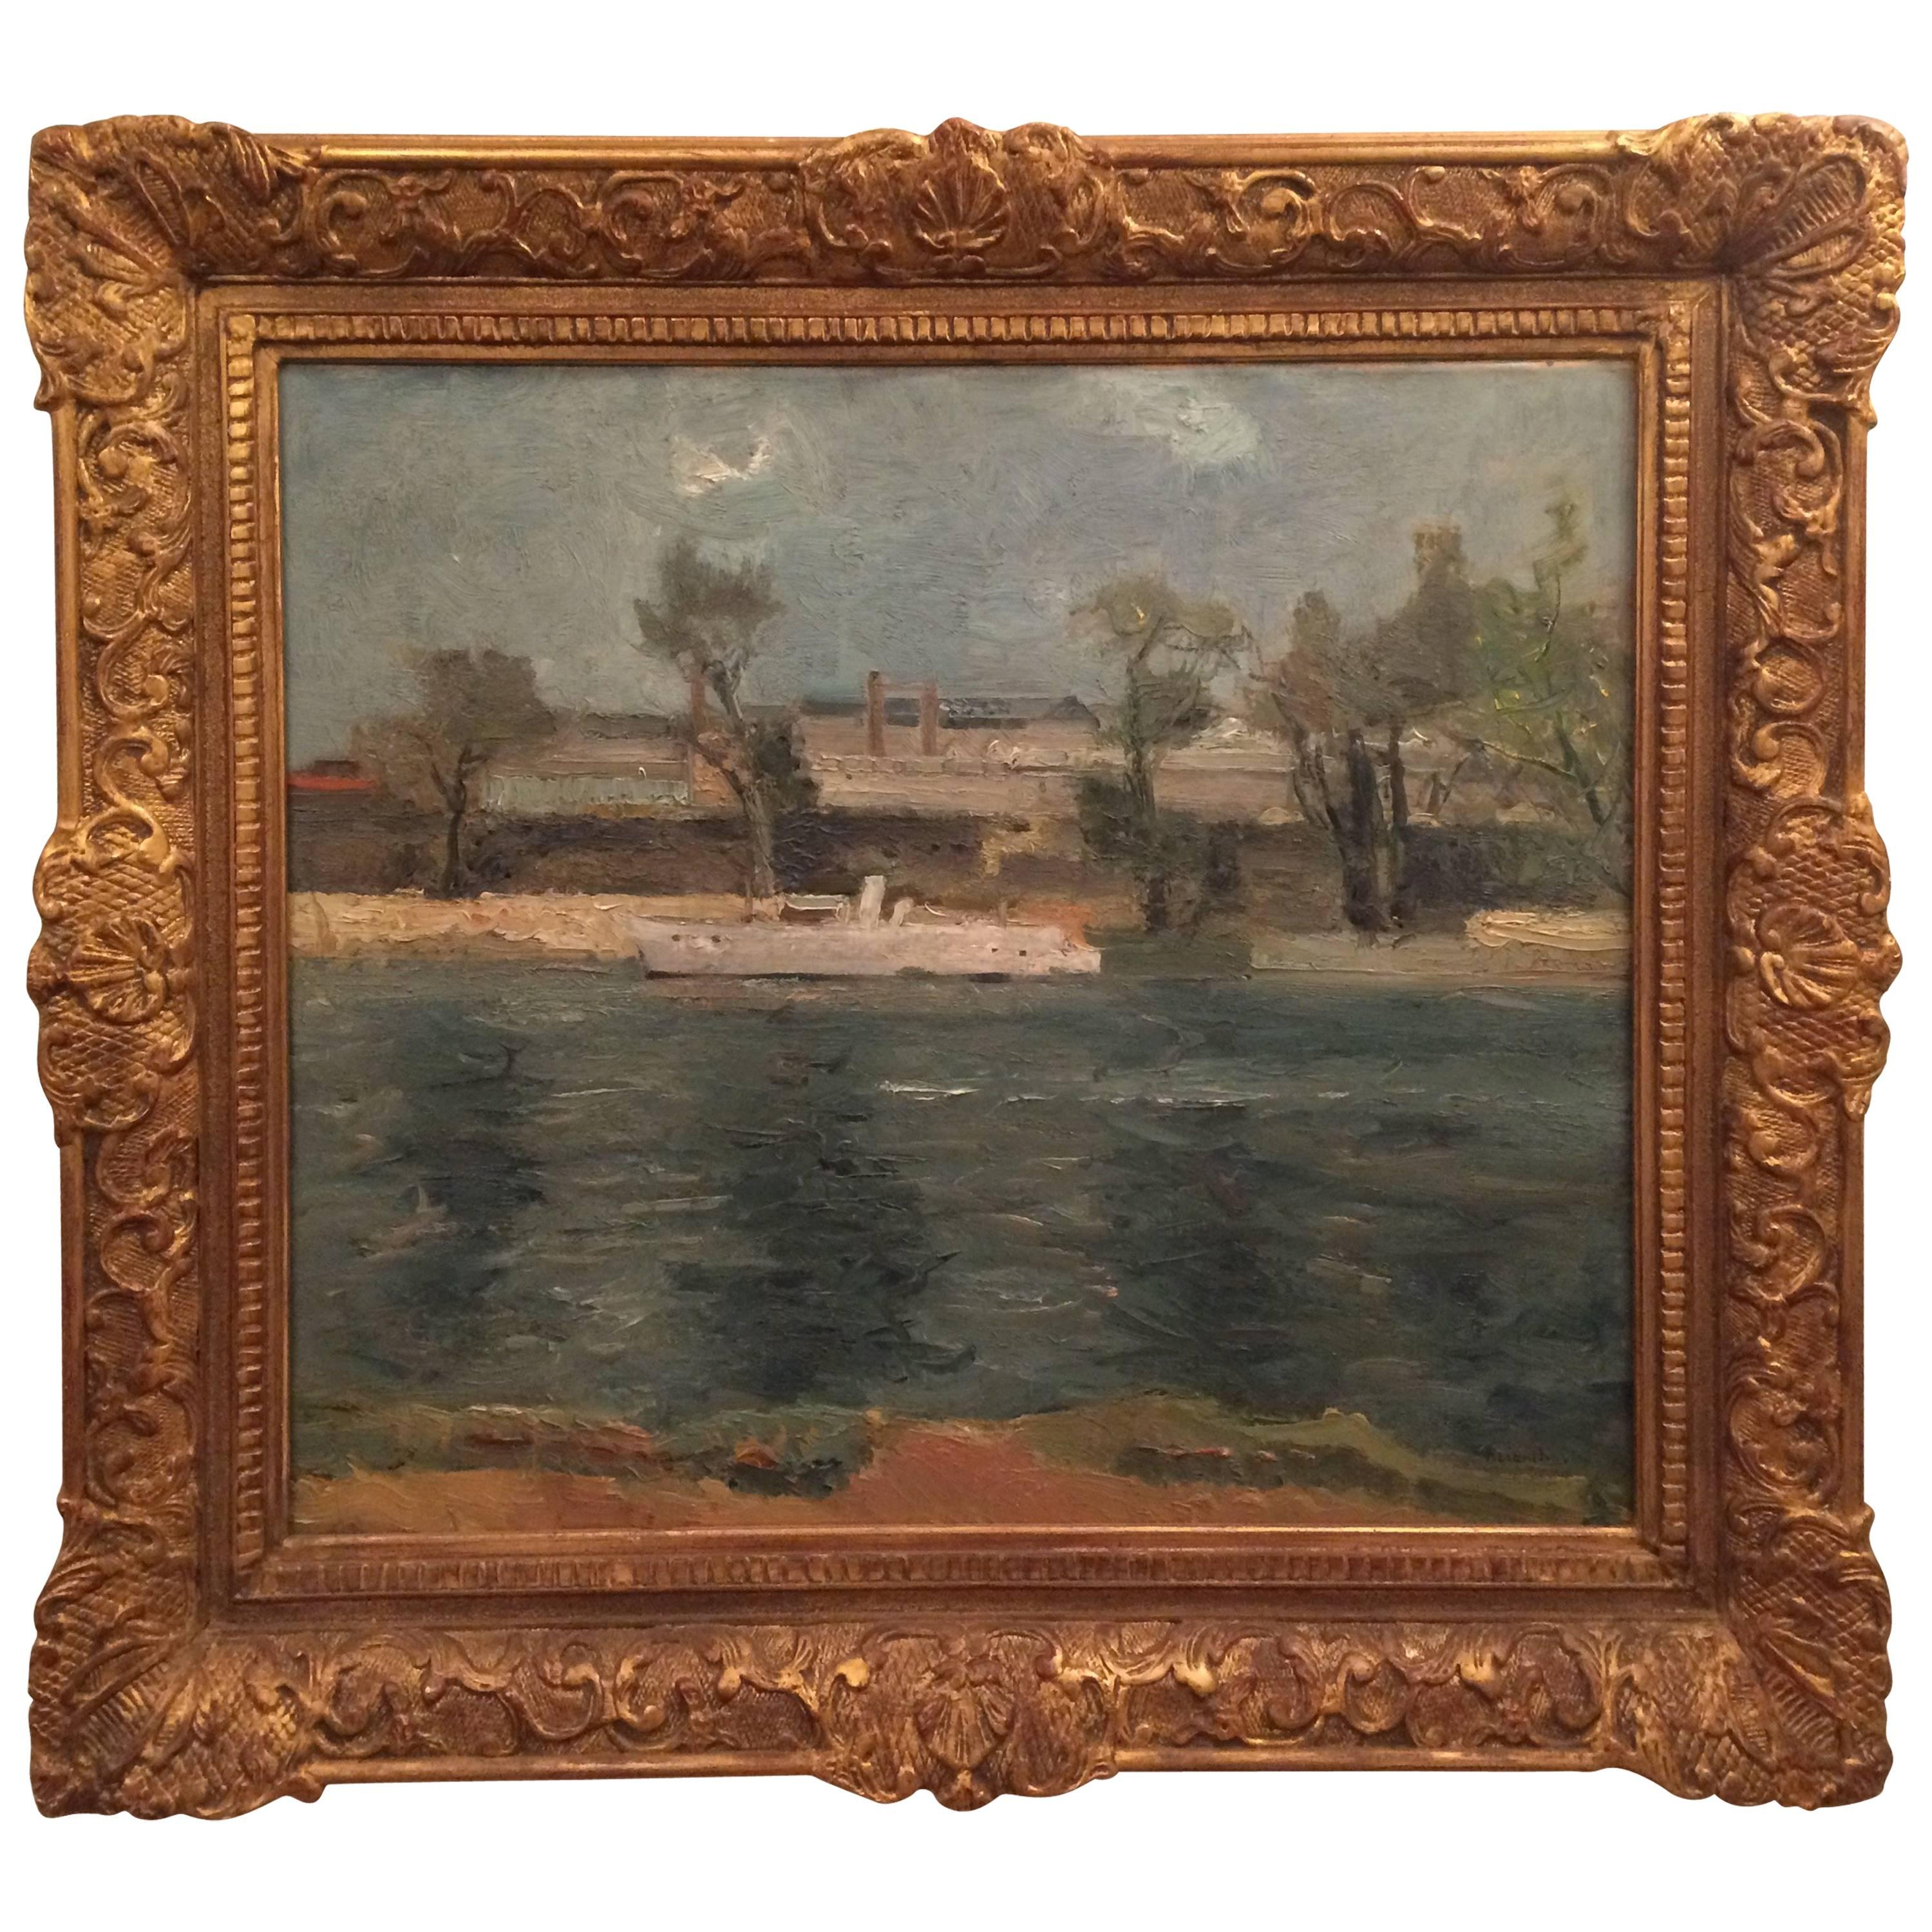 Oil on Canvas "A Paris Scene from the Seine" by Maurice Brianchon (1899-1979) For Sale